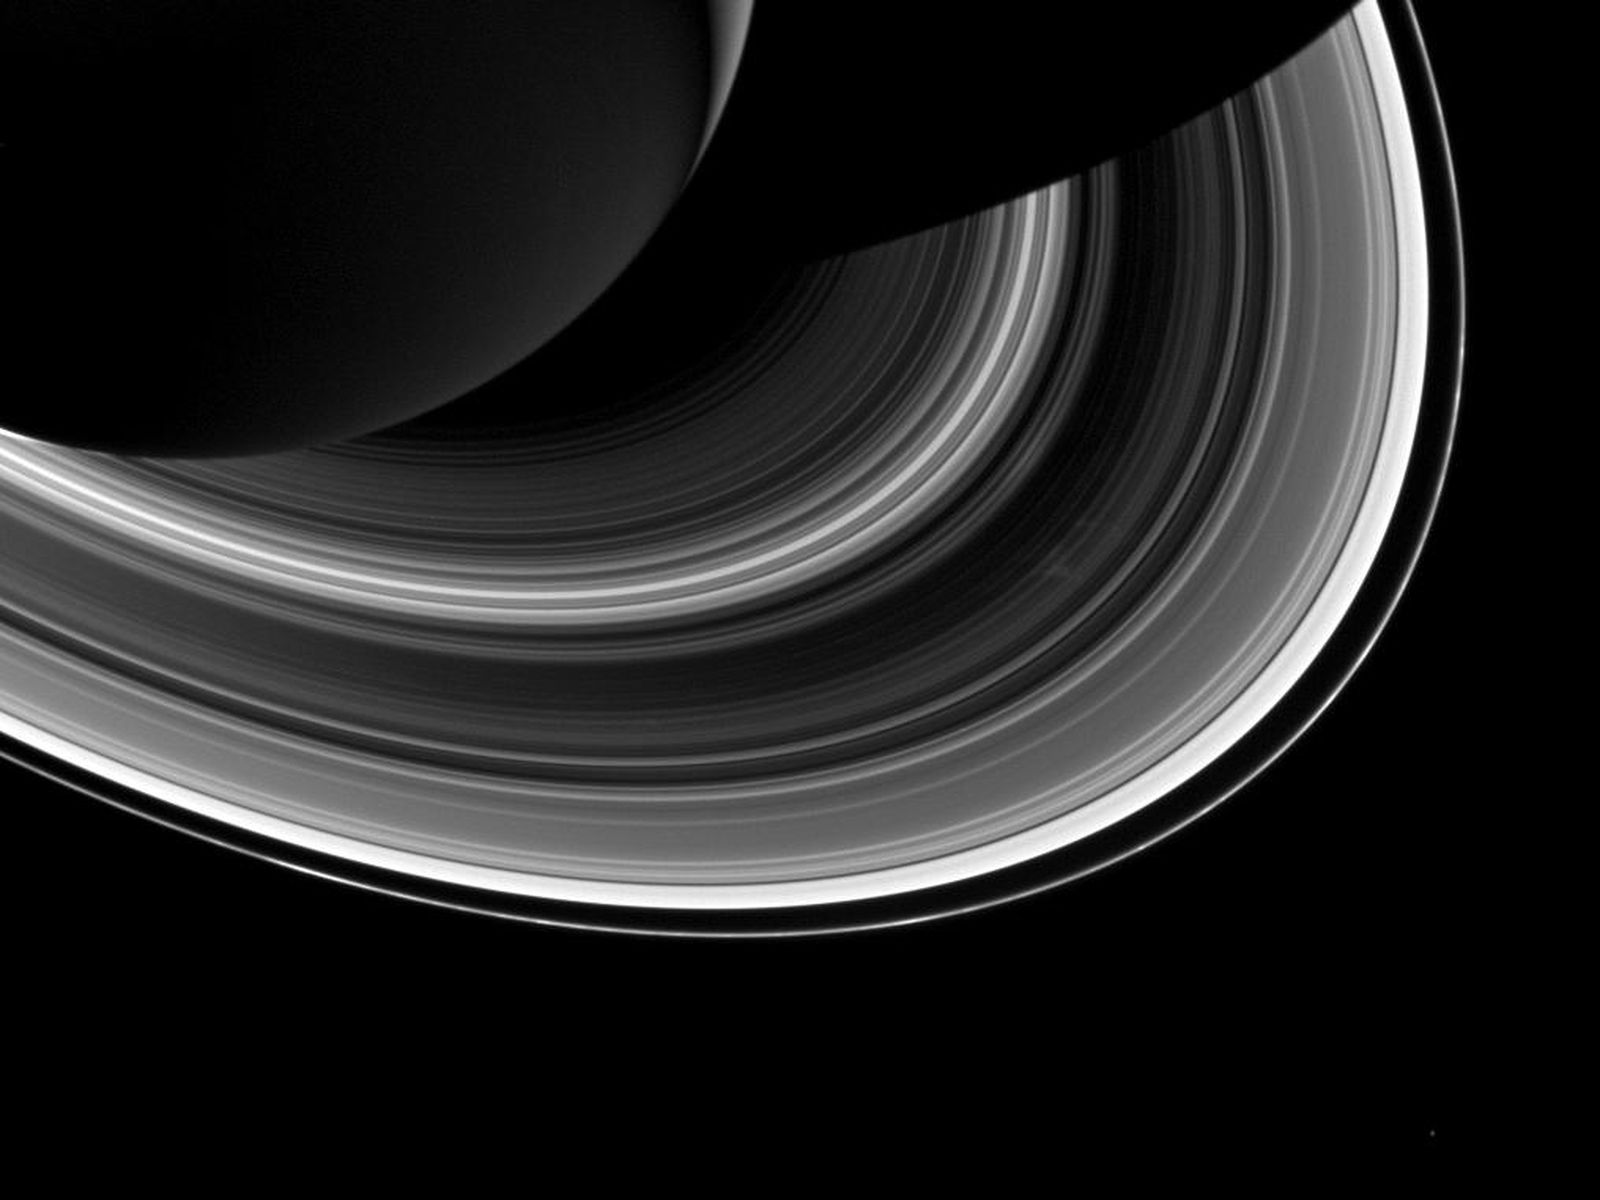 Space Images | Shadows and Rings